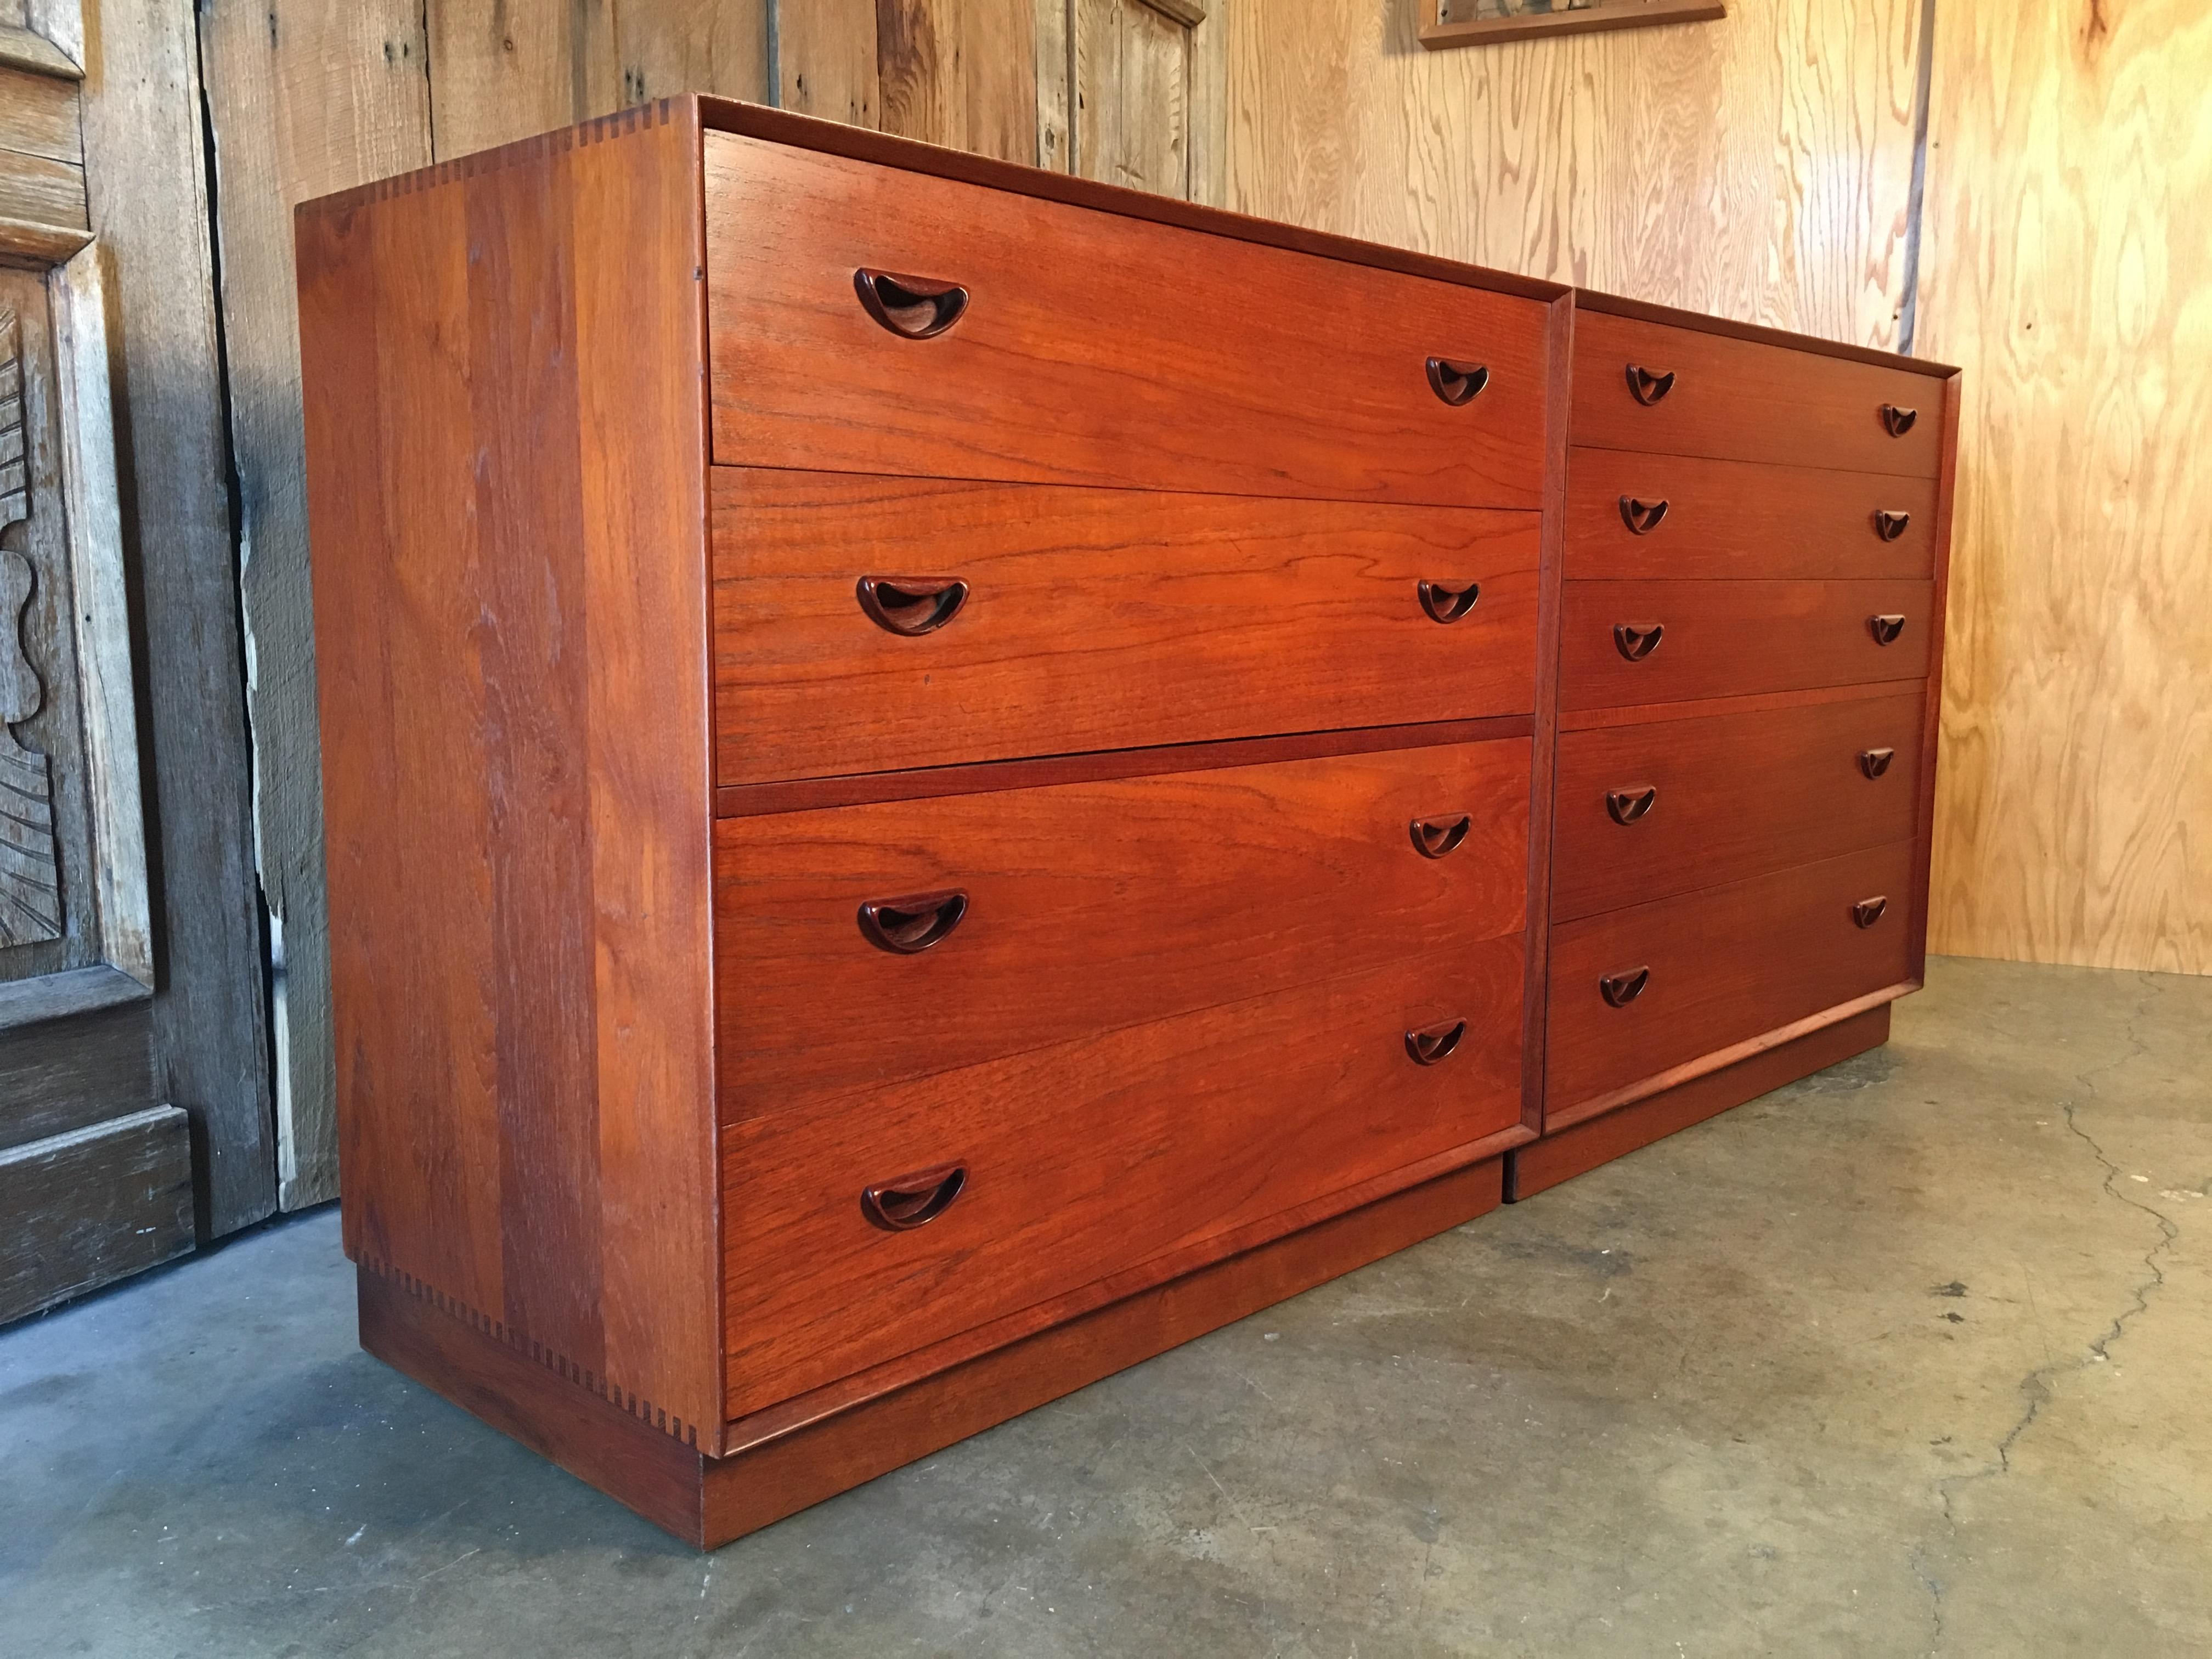 Solid teak Danish modern dressers with dovetailed drawers and box joint corners on the case 
Also one cabinet contains a pullout mirror with small interior drawers.